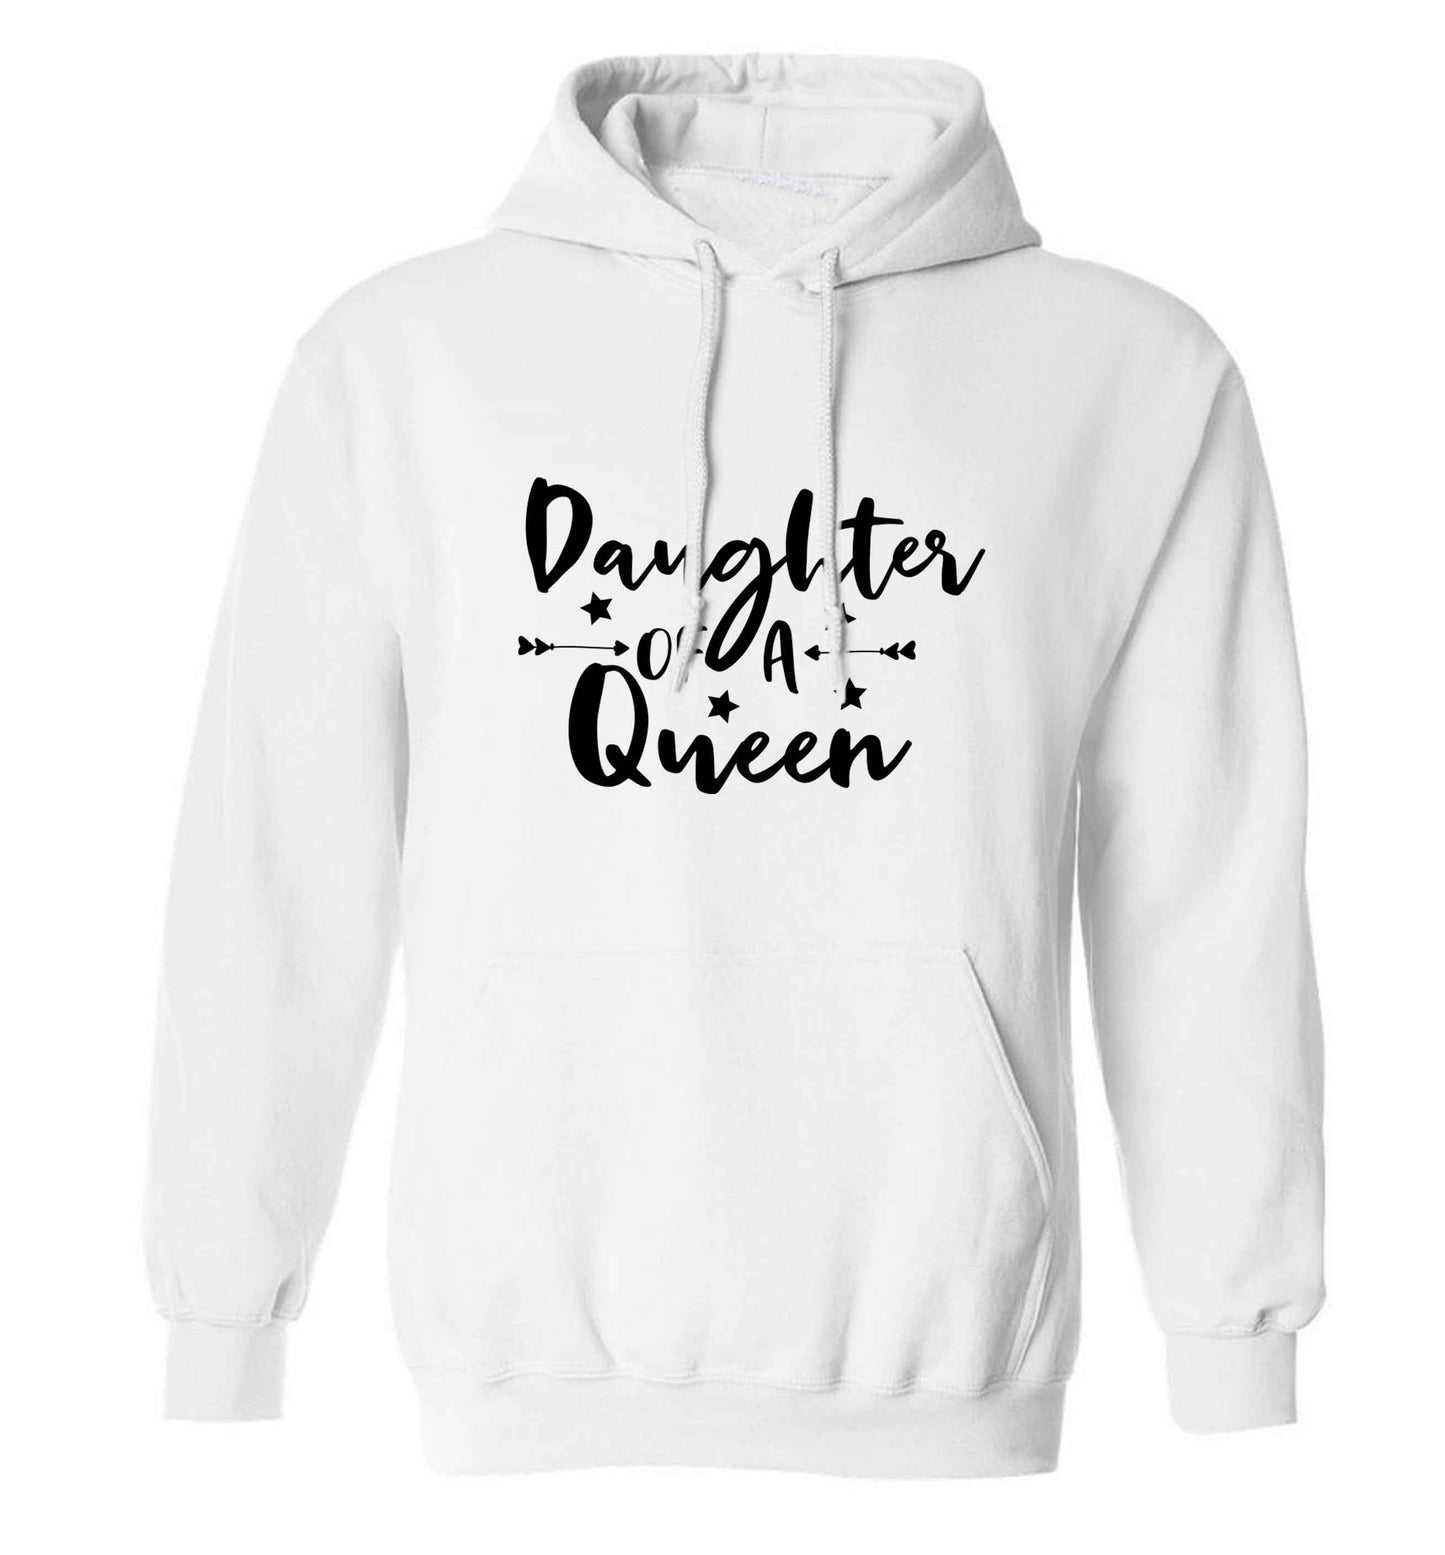 Daughter of a Queen adults unisex white hoodie 2XL